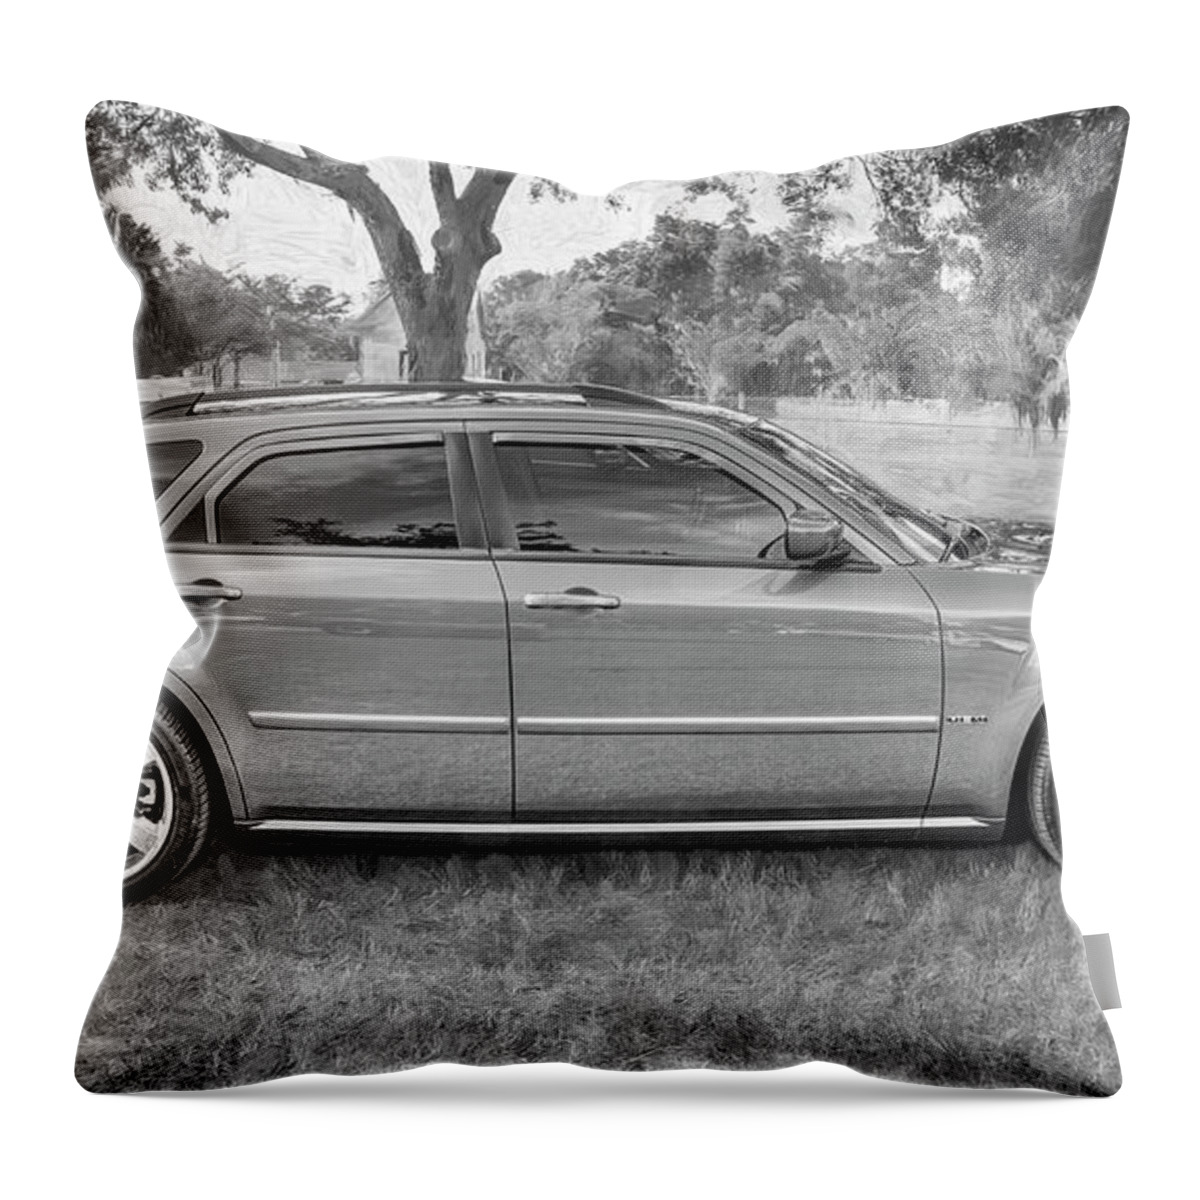 2006 Dodge Magnum Rt Throw Pillow featuring the photograph 2006 Dodge Magnum RT X109 by Rich Franco